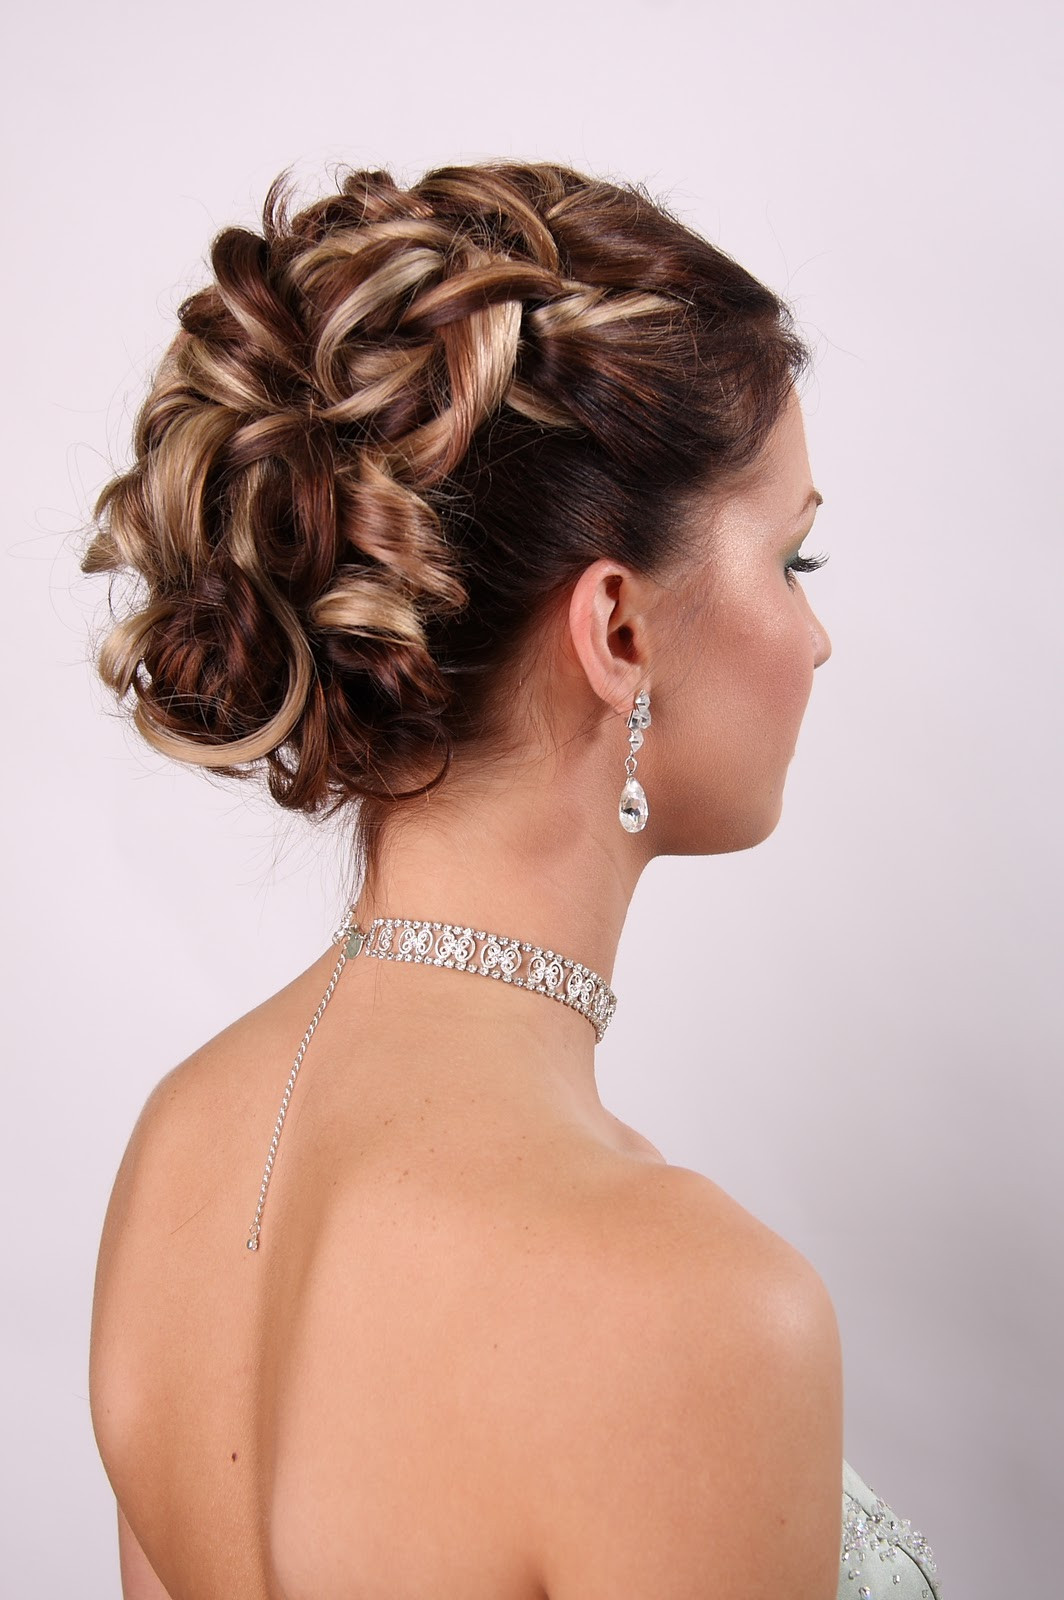 Bridesmaid Hairstyles Updo
 50 Hairstyles For Weddings To Look Amazingly Special